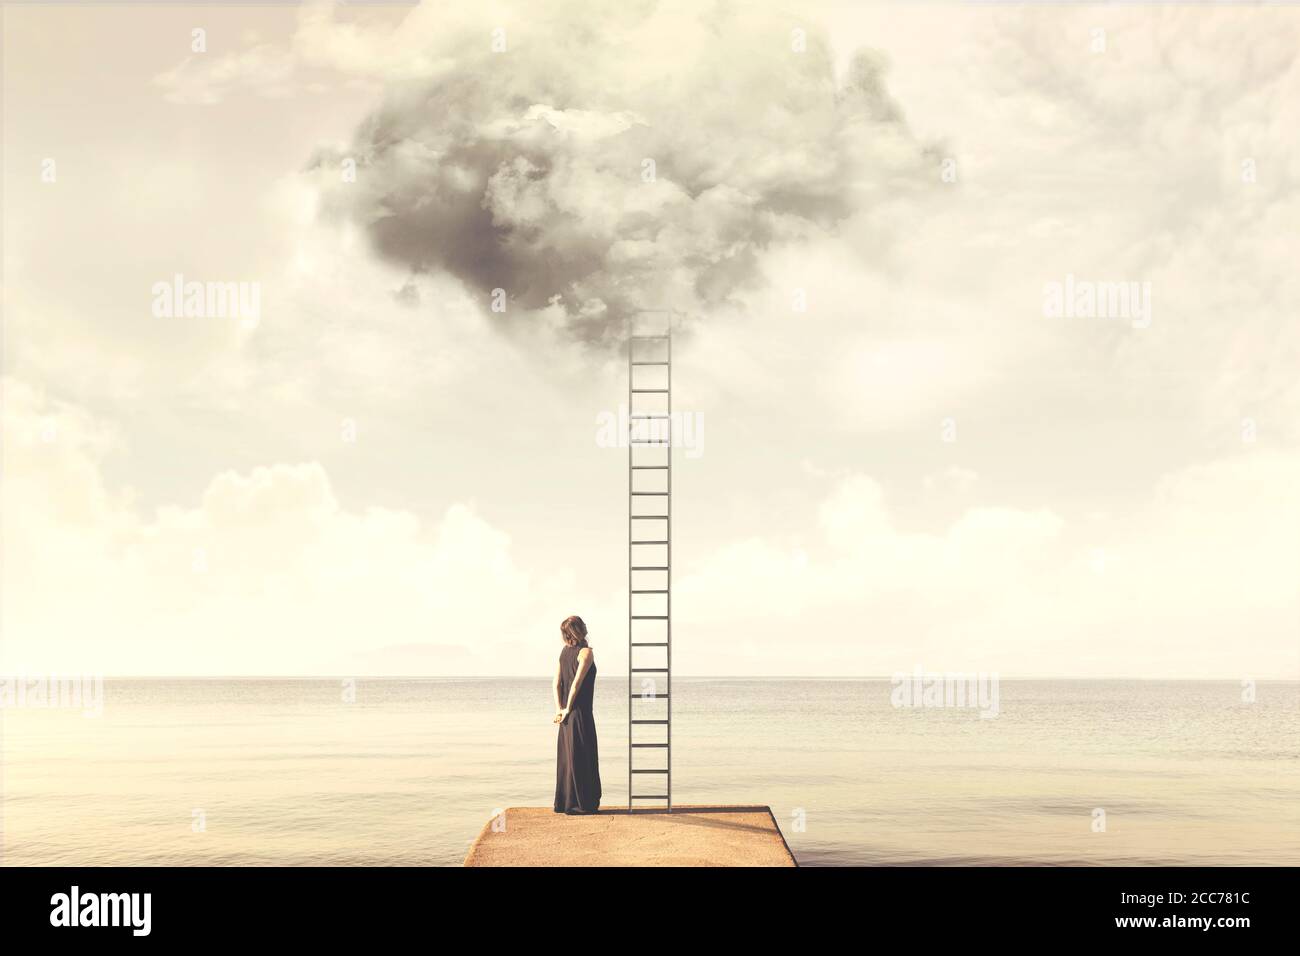 Indecisive woman does not know if climb up a ladder from the sky to a disenchanted destination Stock Photo